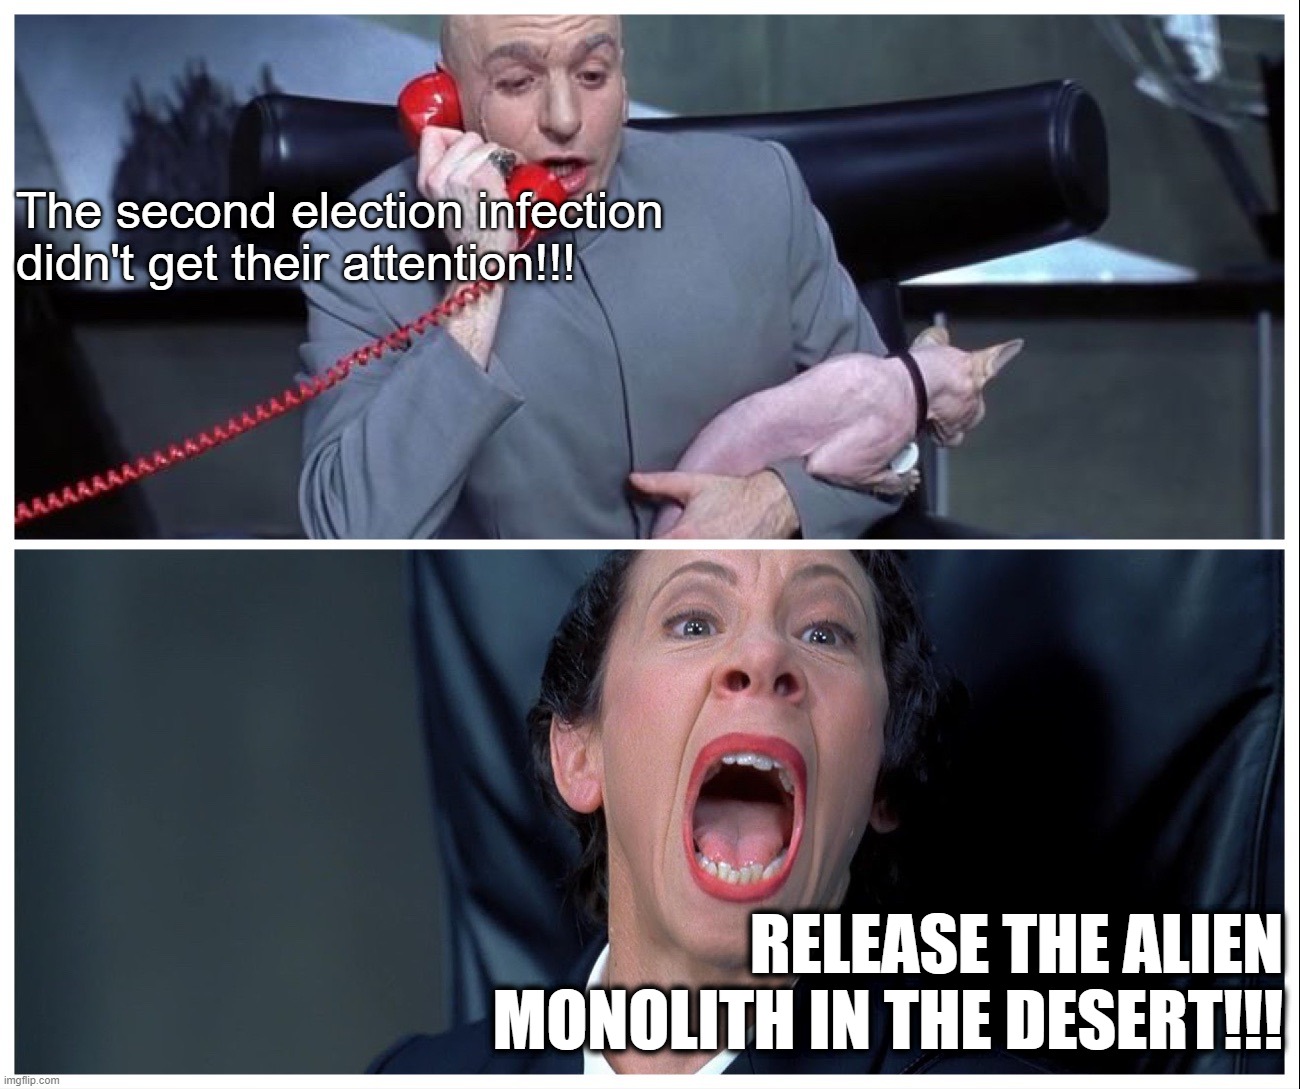 Election Infection Part Deux | The second election infection didn't get their attention!!! RELEASE THE ALIEN MONOLITH IN THE DESERT!!! | image tagged in dr evil and frau yelling | made w/ Imgflip meme maker